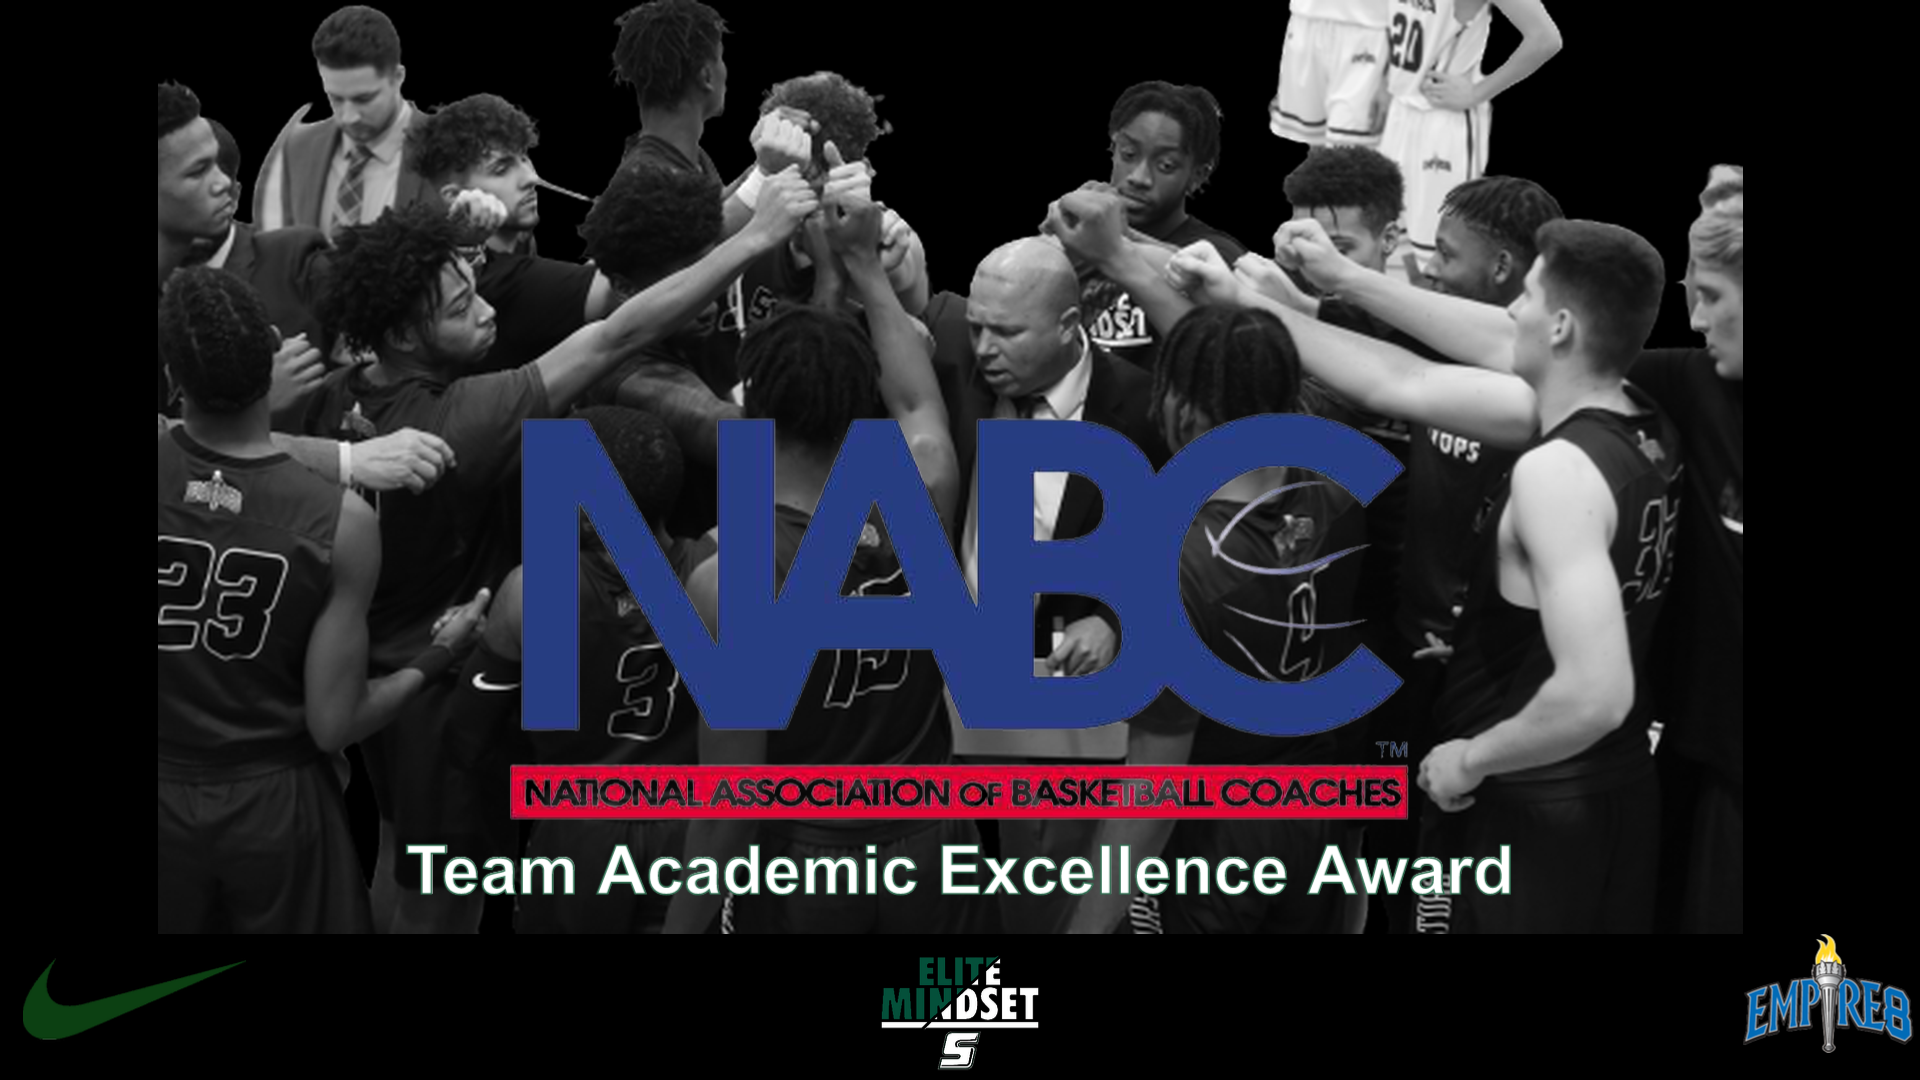 RSC Men's Basketball Program honored by NABC with Team Excellence Award